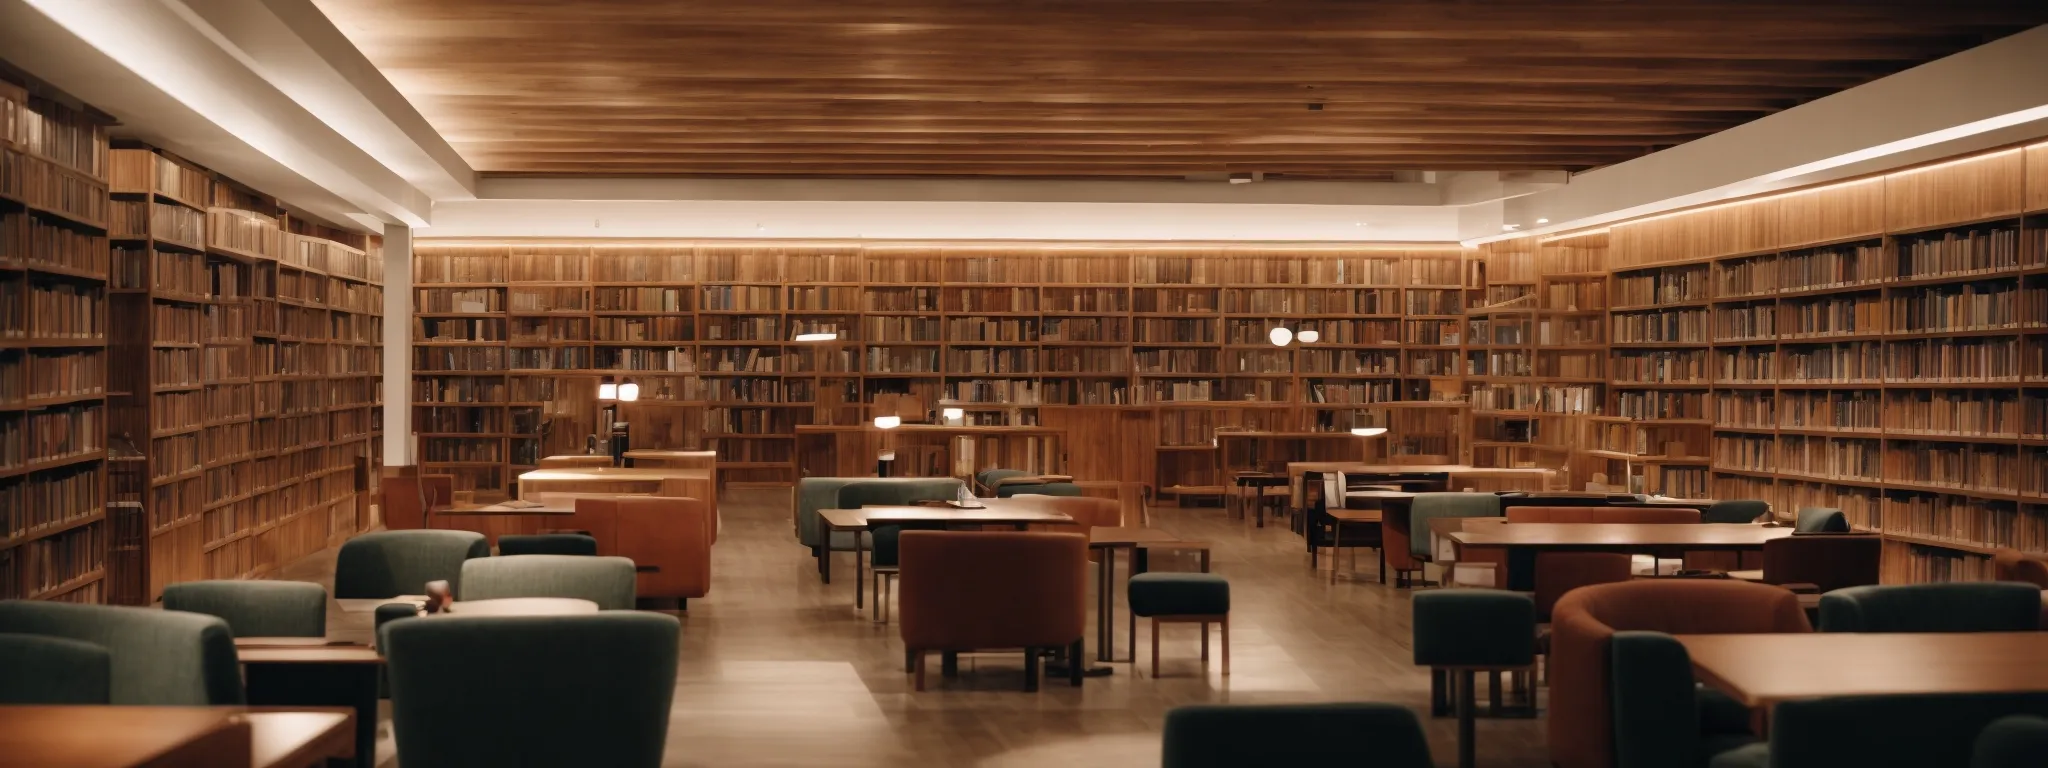 a spacious, modern library with rows of thick books neatly arranged on shelves and a large, inviting table with comfortable chairs under soft lighting, facilitating concentration and reading.